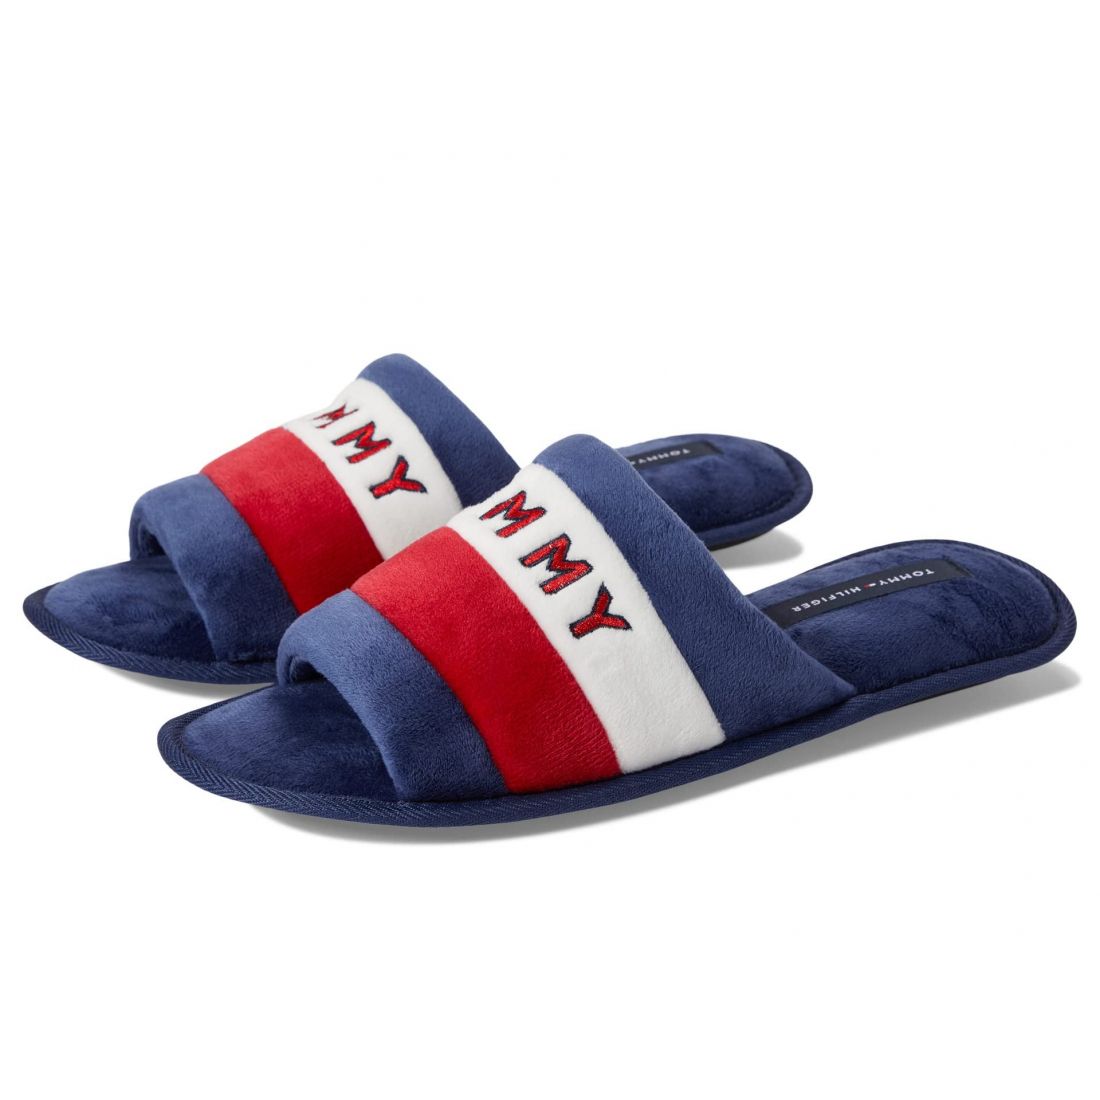 Tommy Hilfiger - Chaussons 'Xolo' pour Hommes